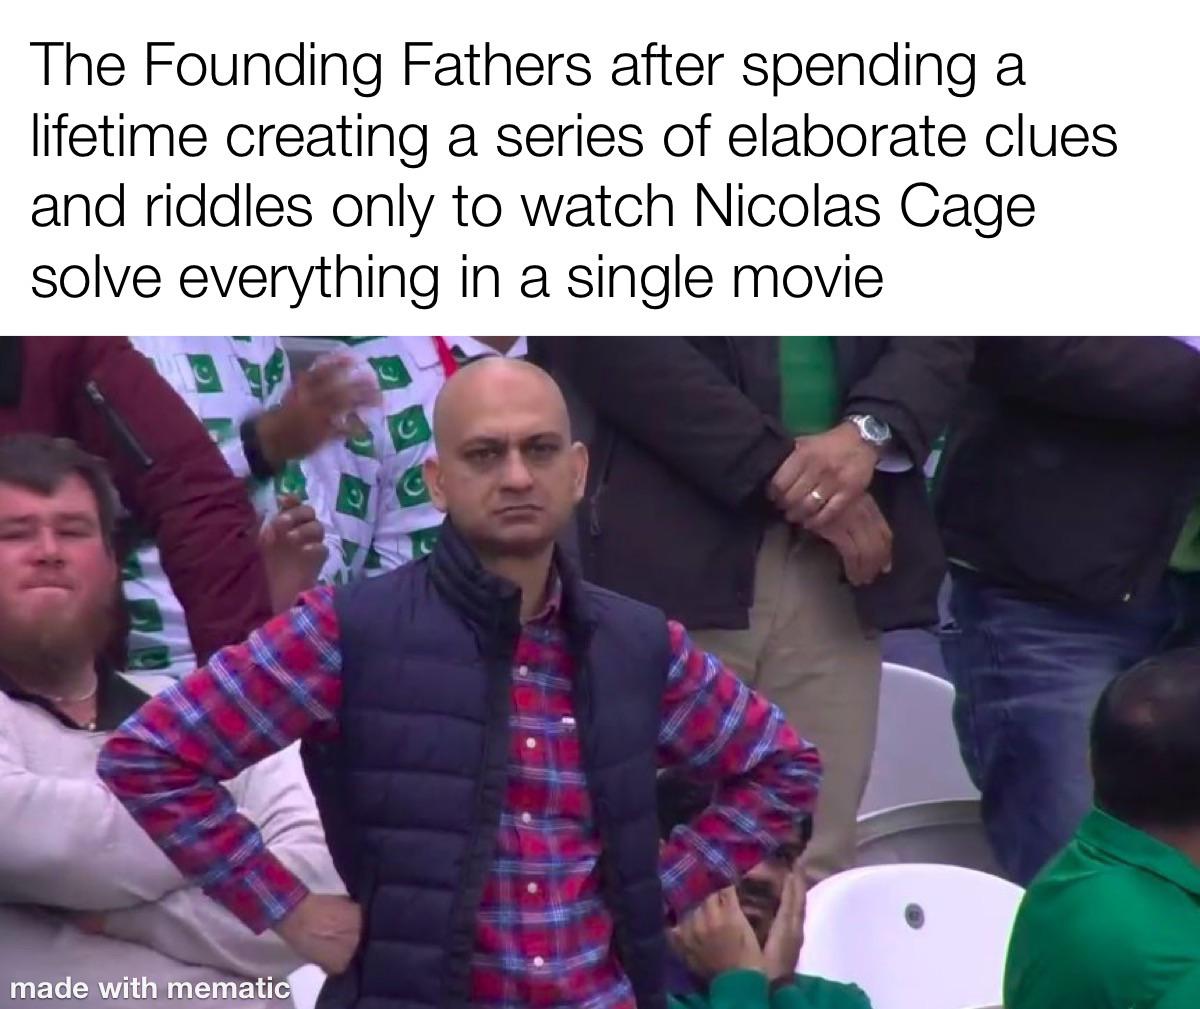 funny pics and memes - aegon meme house of the dragon - The Founding Fathers after spending a lifetime creating a series of elaborate clues and riddles only to watch Nicolas Cage solve everything in a single movie made with mematic